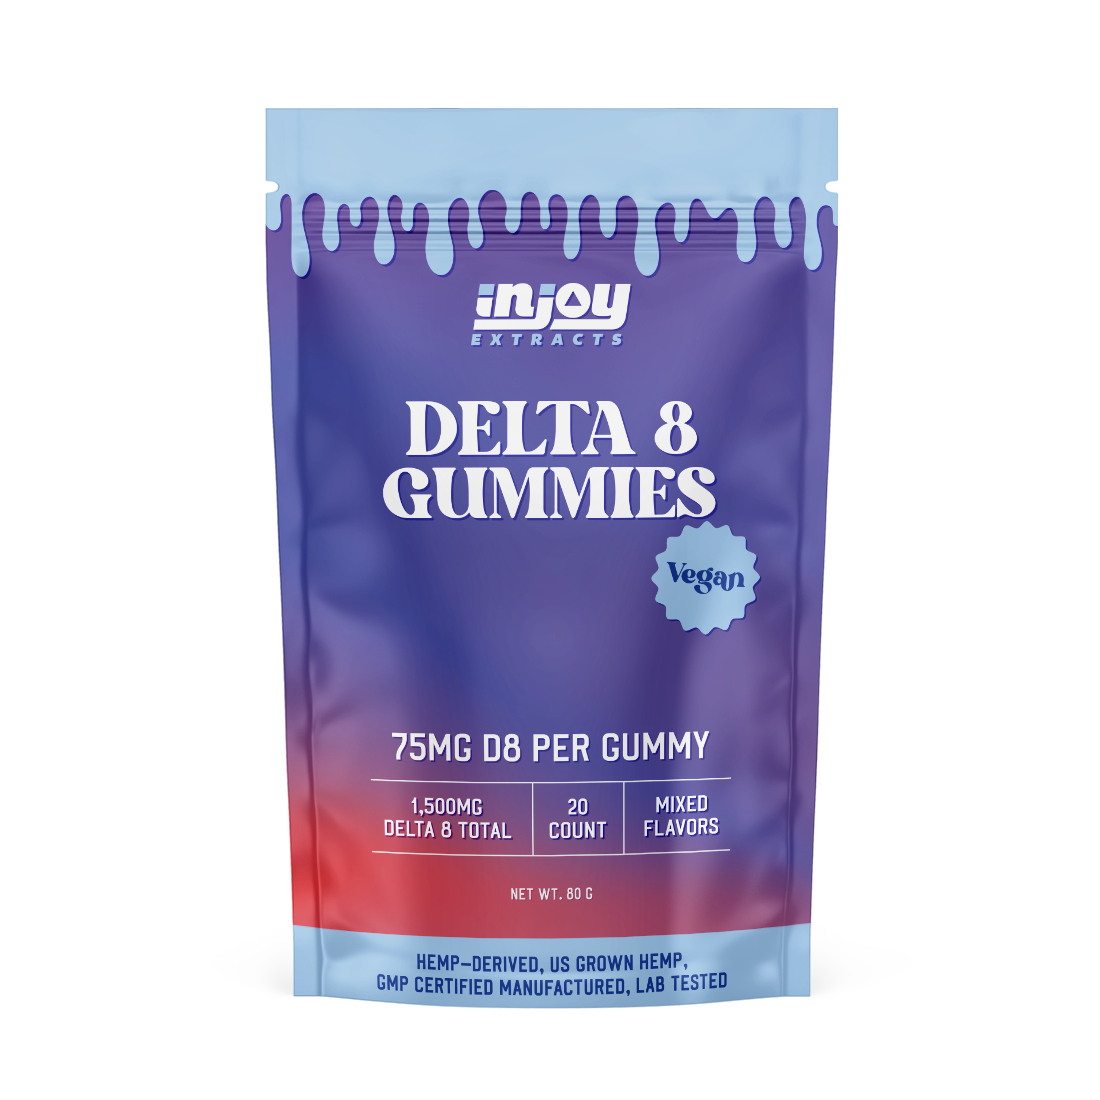 a picture of the front of the 75mg delta 8 gummies bag